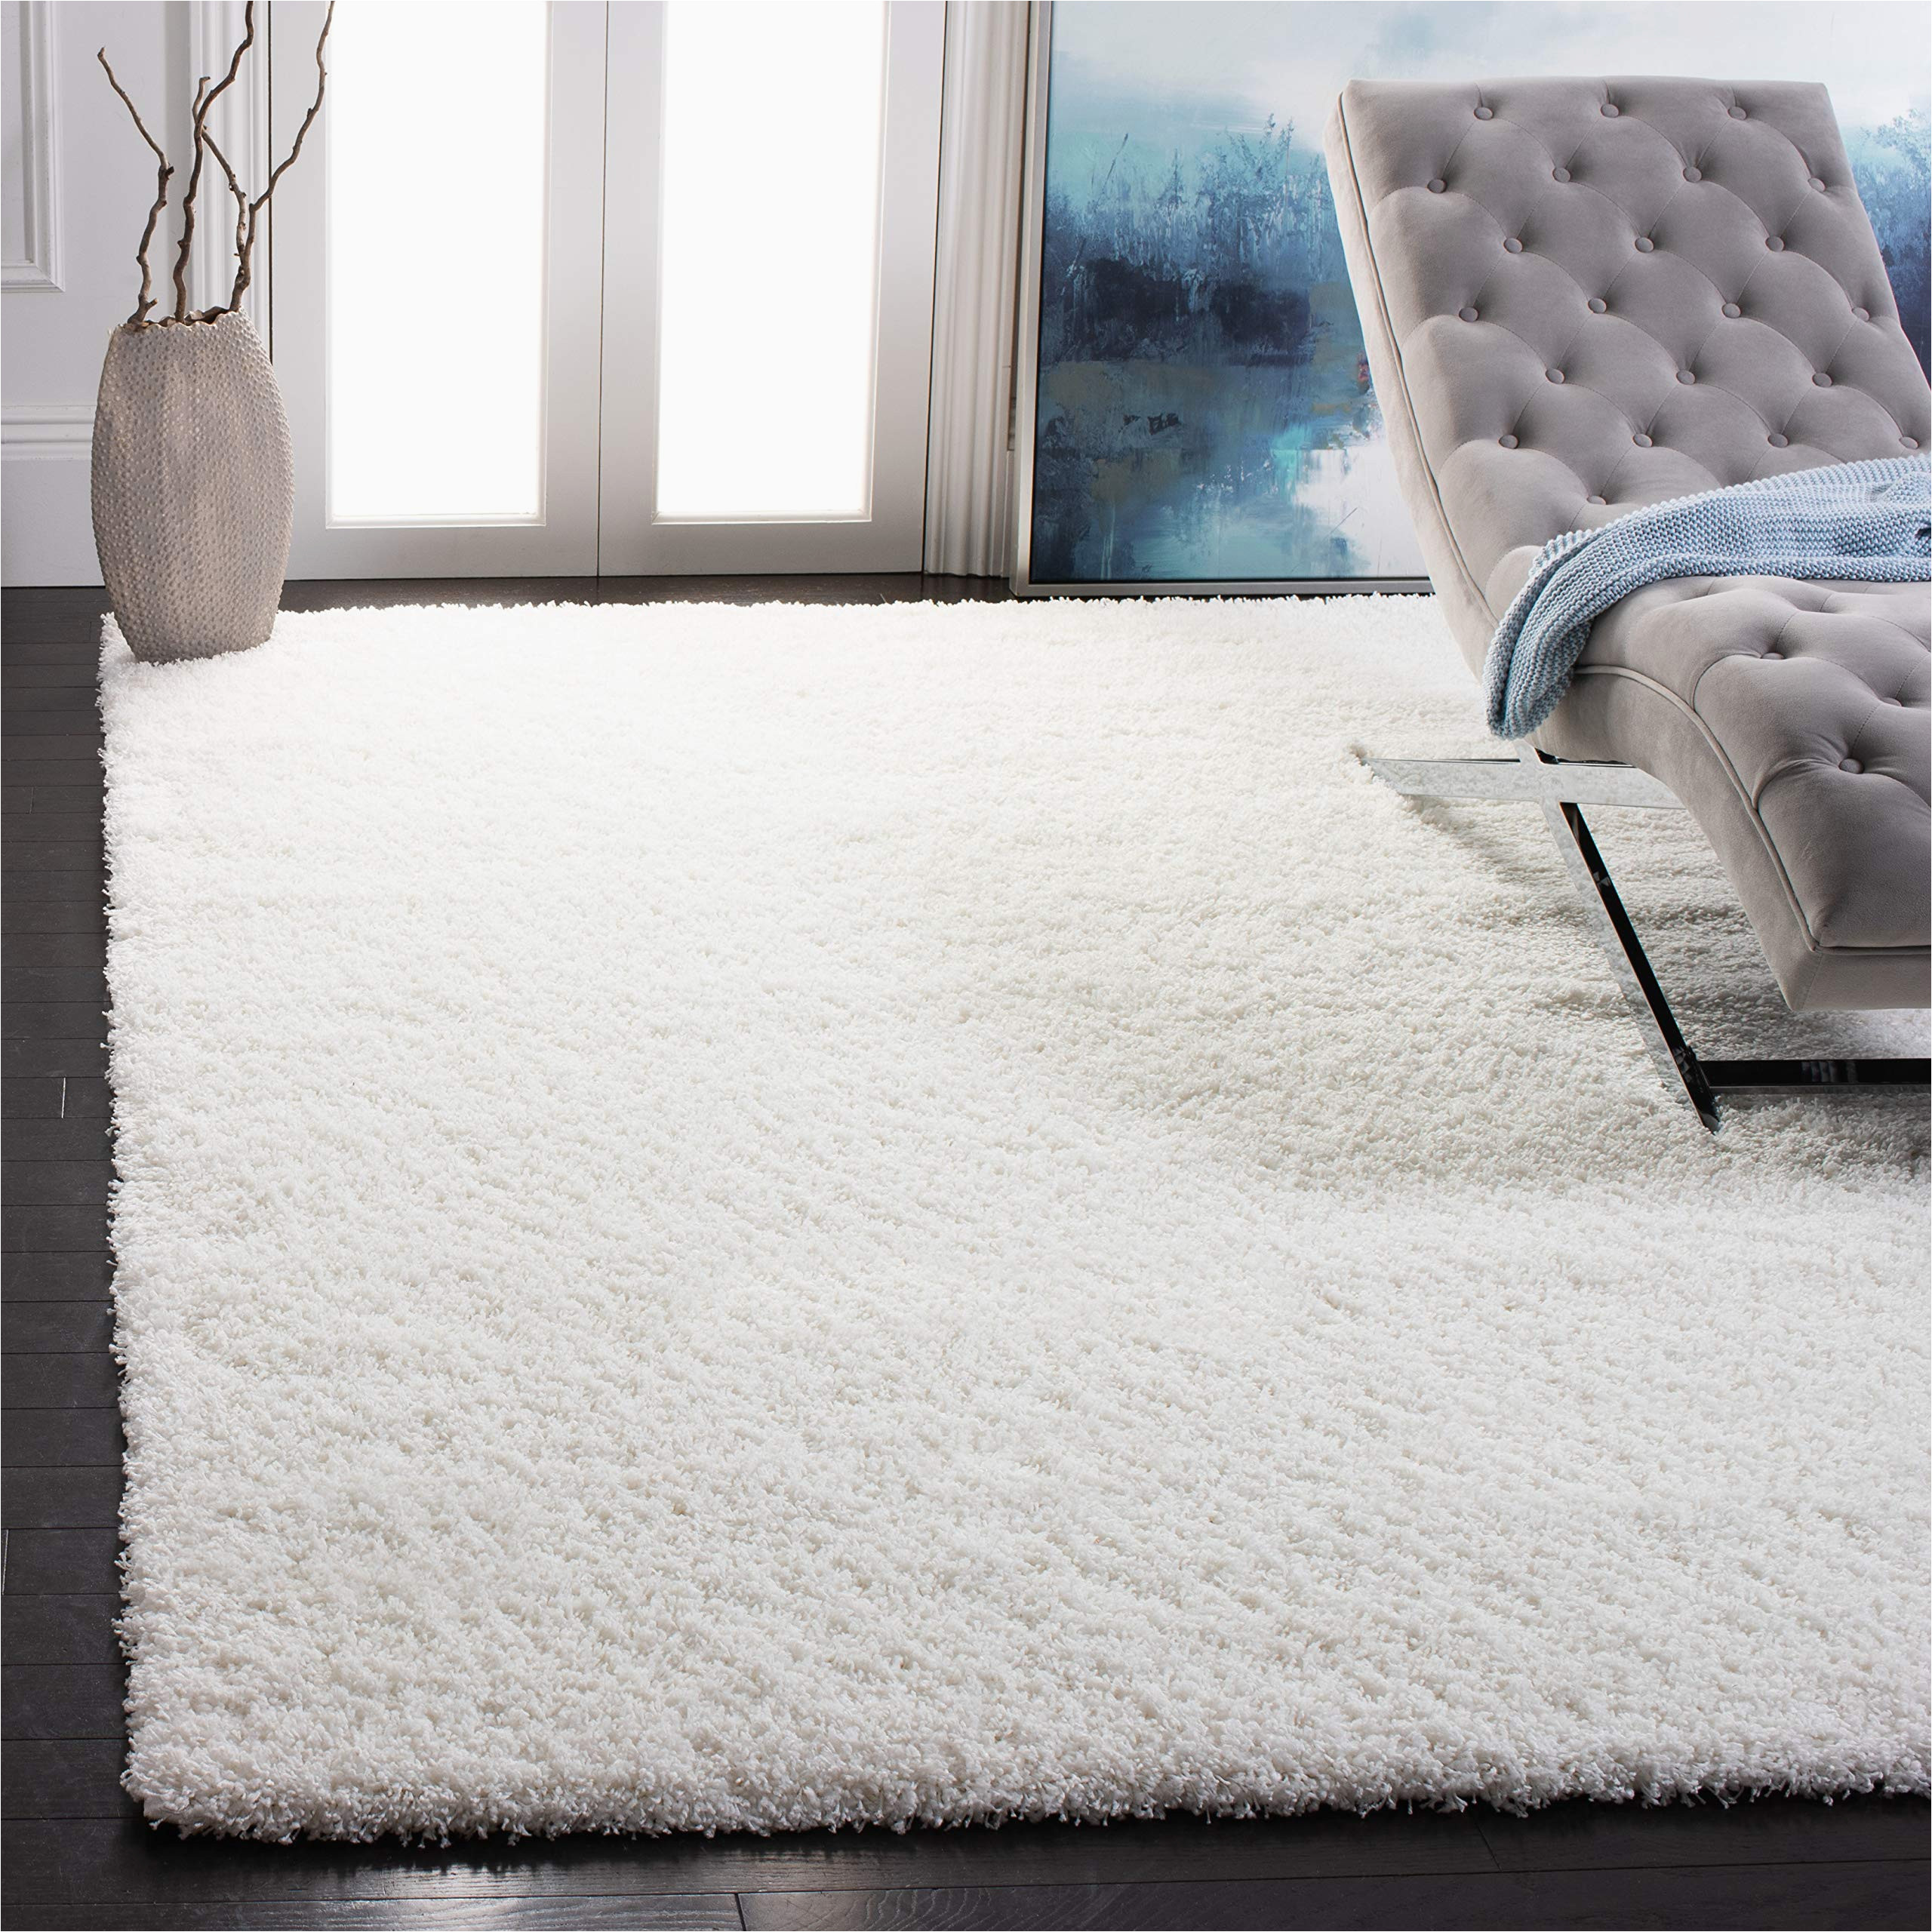 Abrielle Power Loom Natural Ivory area Rug Highland Dunes   Abrielle Power Loom Natural/ivory area Rug